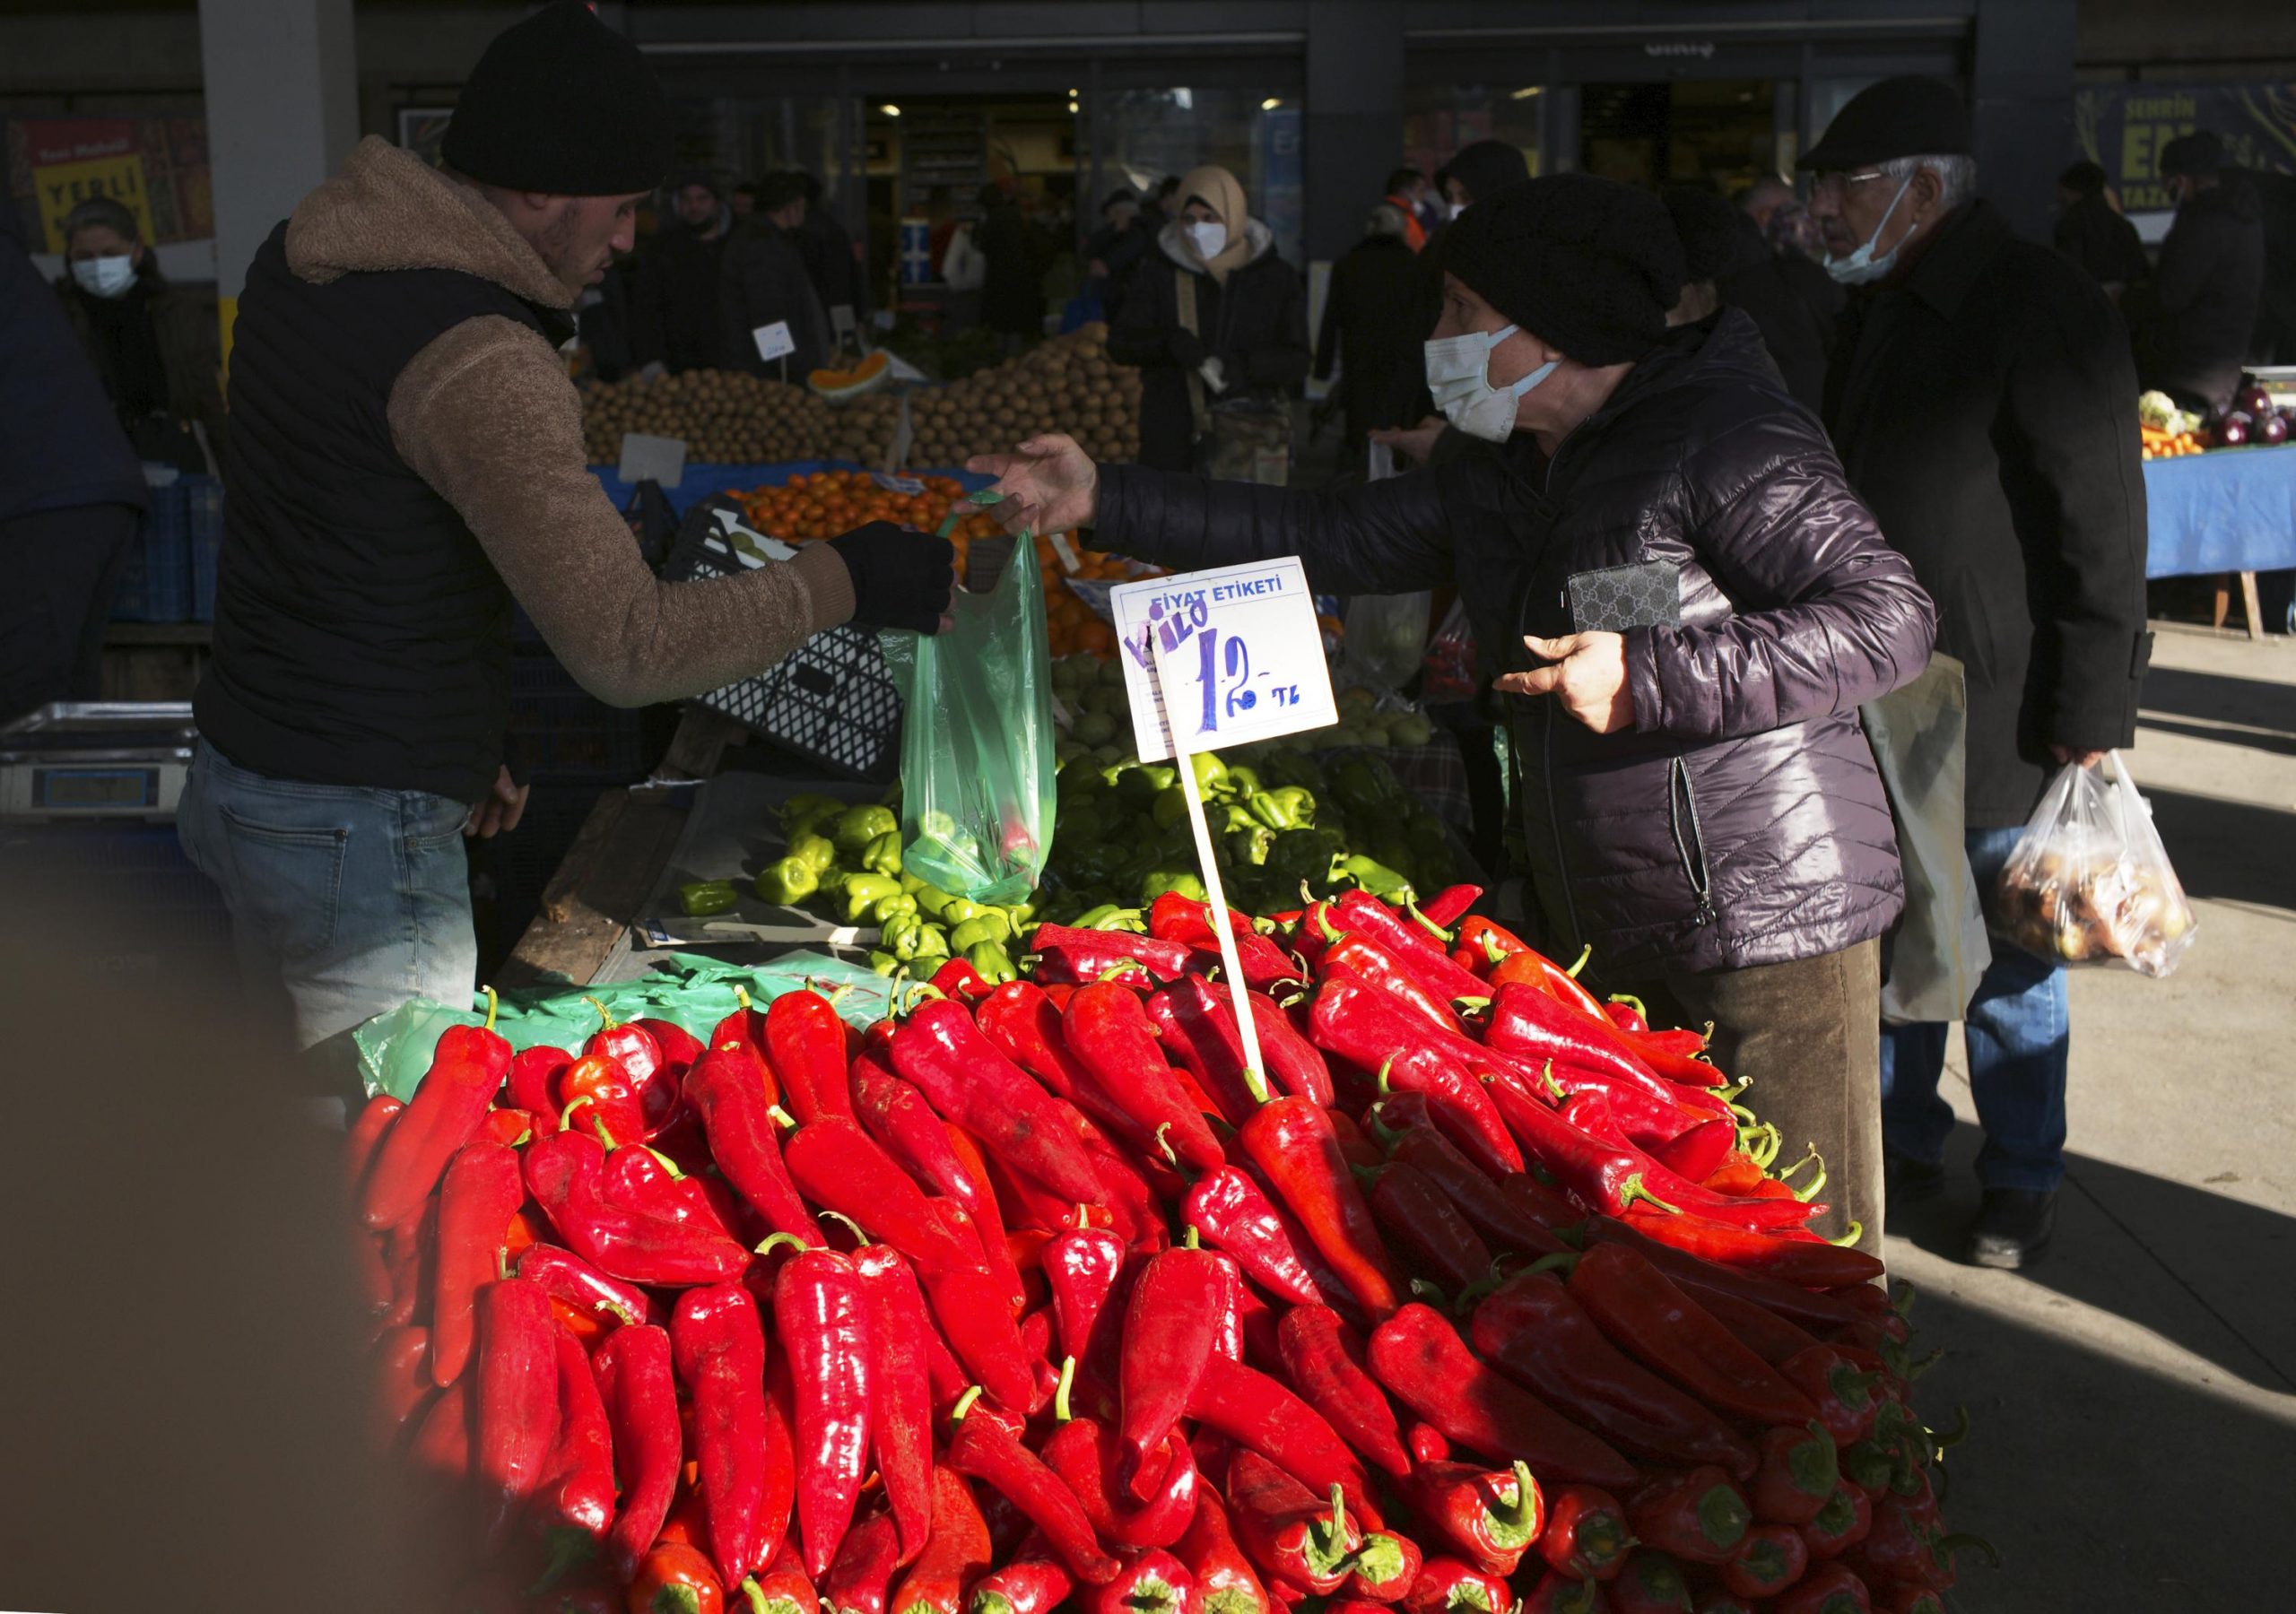 Turkey's inflation hits 54%, deepening cost-of-living woes 6